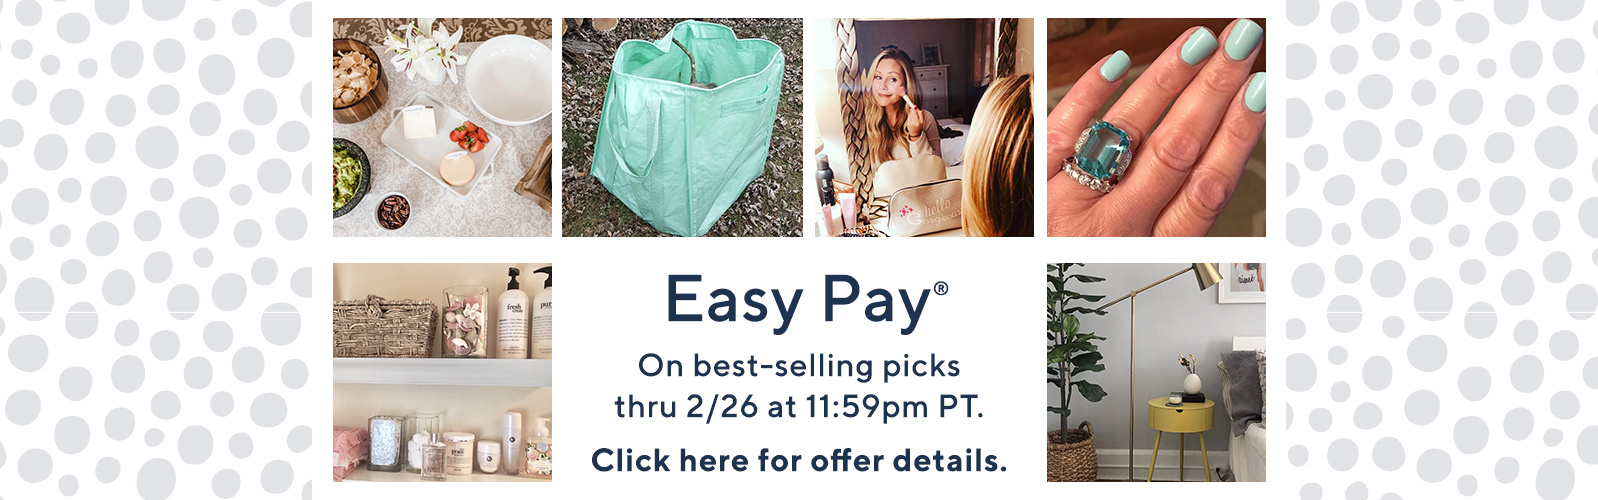 Easy Pay®  On best-selling picks thru 2/26 at 11:59pm PT.  Click here for offer details.